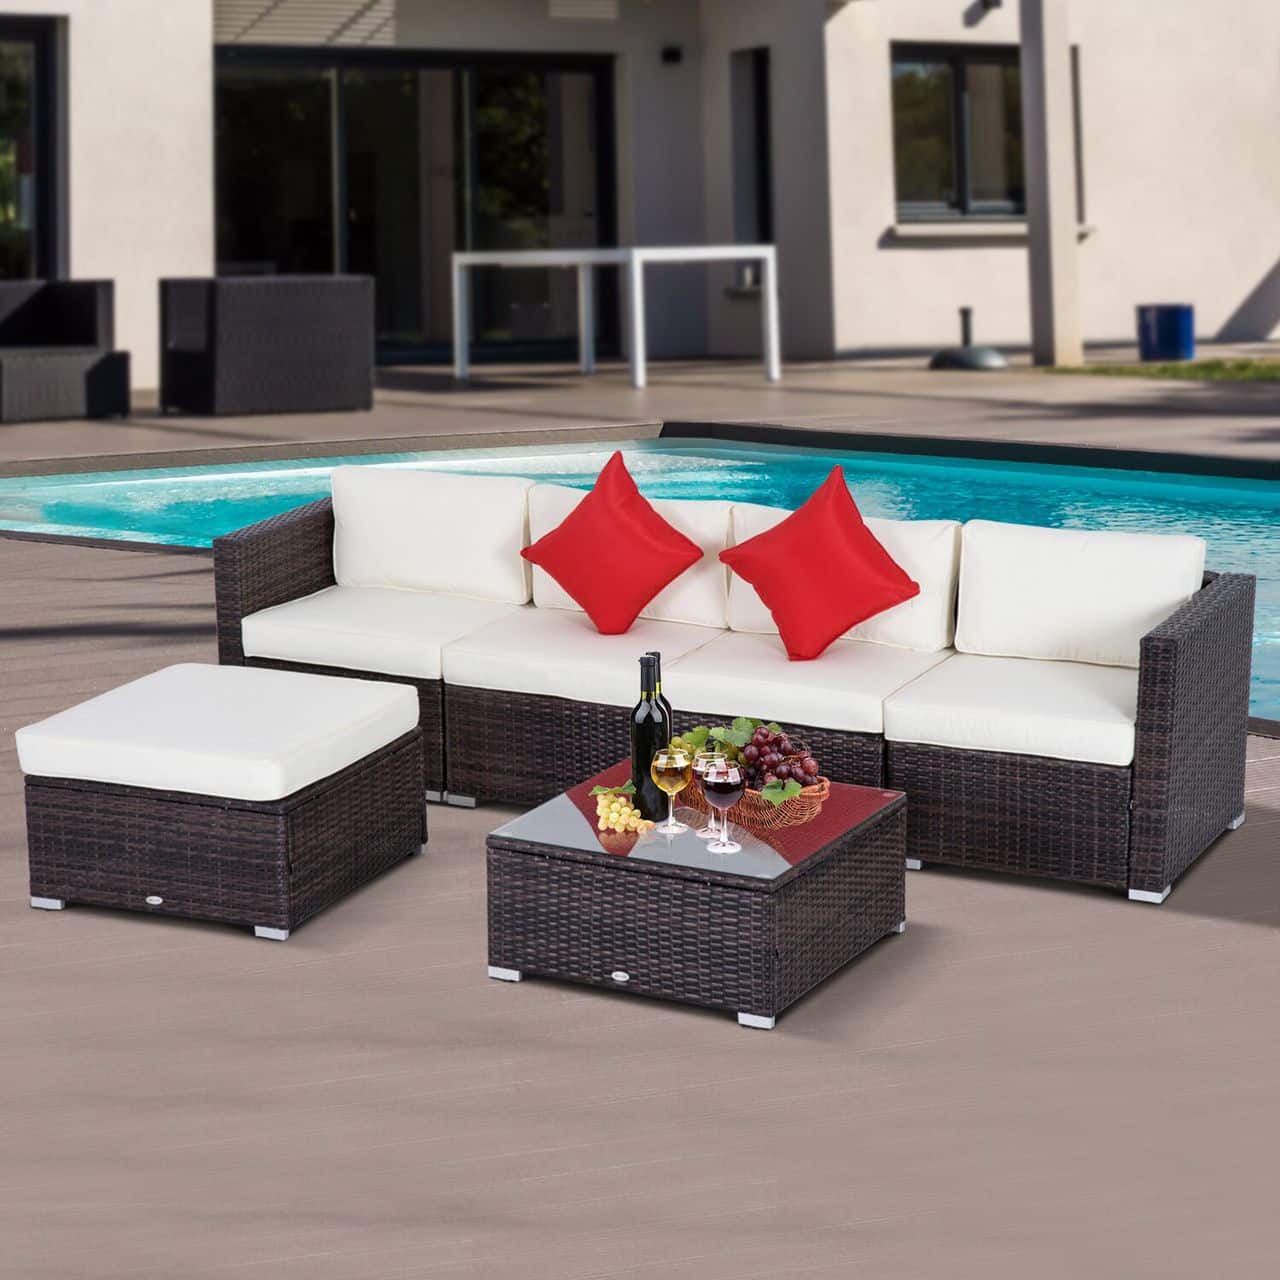 Memorial Day 2021 sale: Huge savings on patio furniture and grills from ...